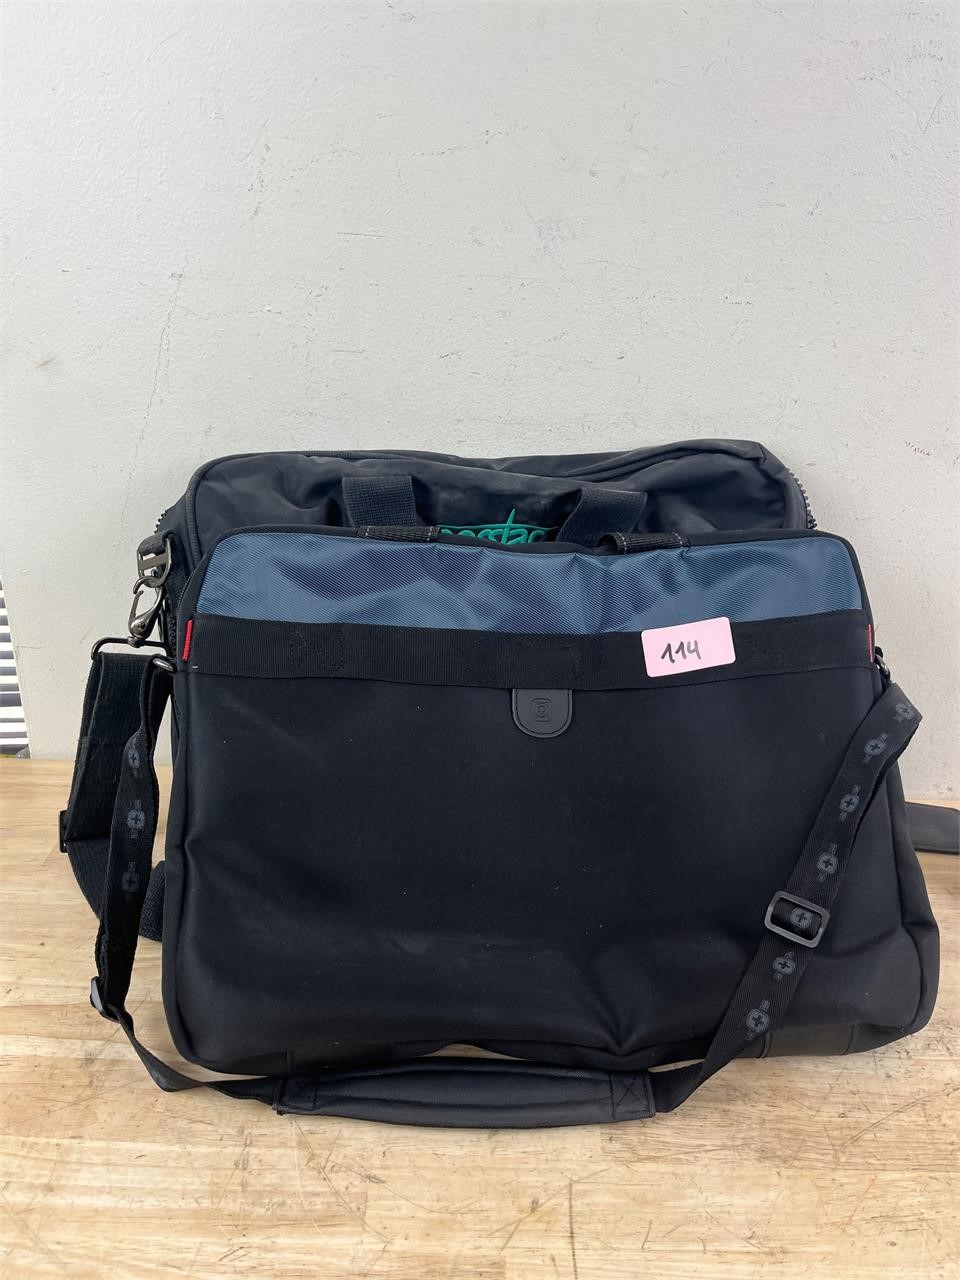 Lot of Laptop Bags